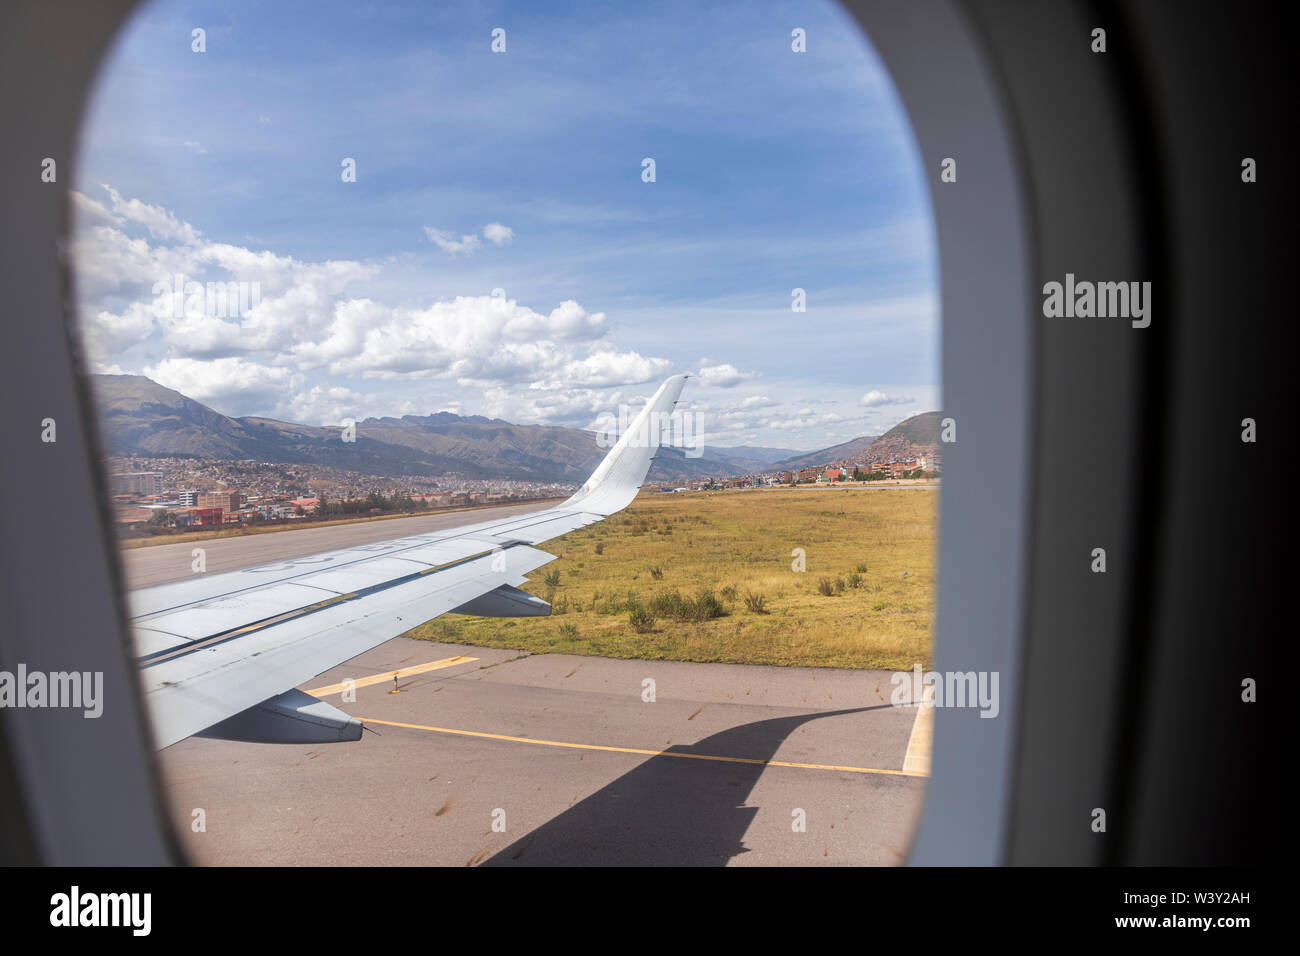 Cusco airport and runway from inside the cabin of a passenger plane, Peru, South America Stock Photo